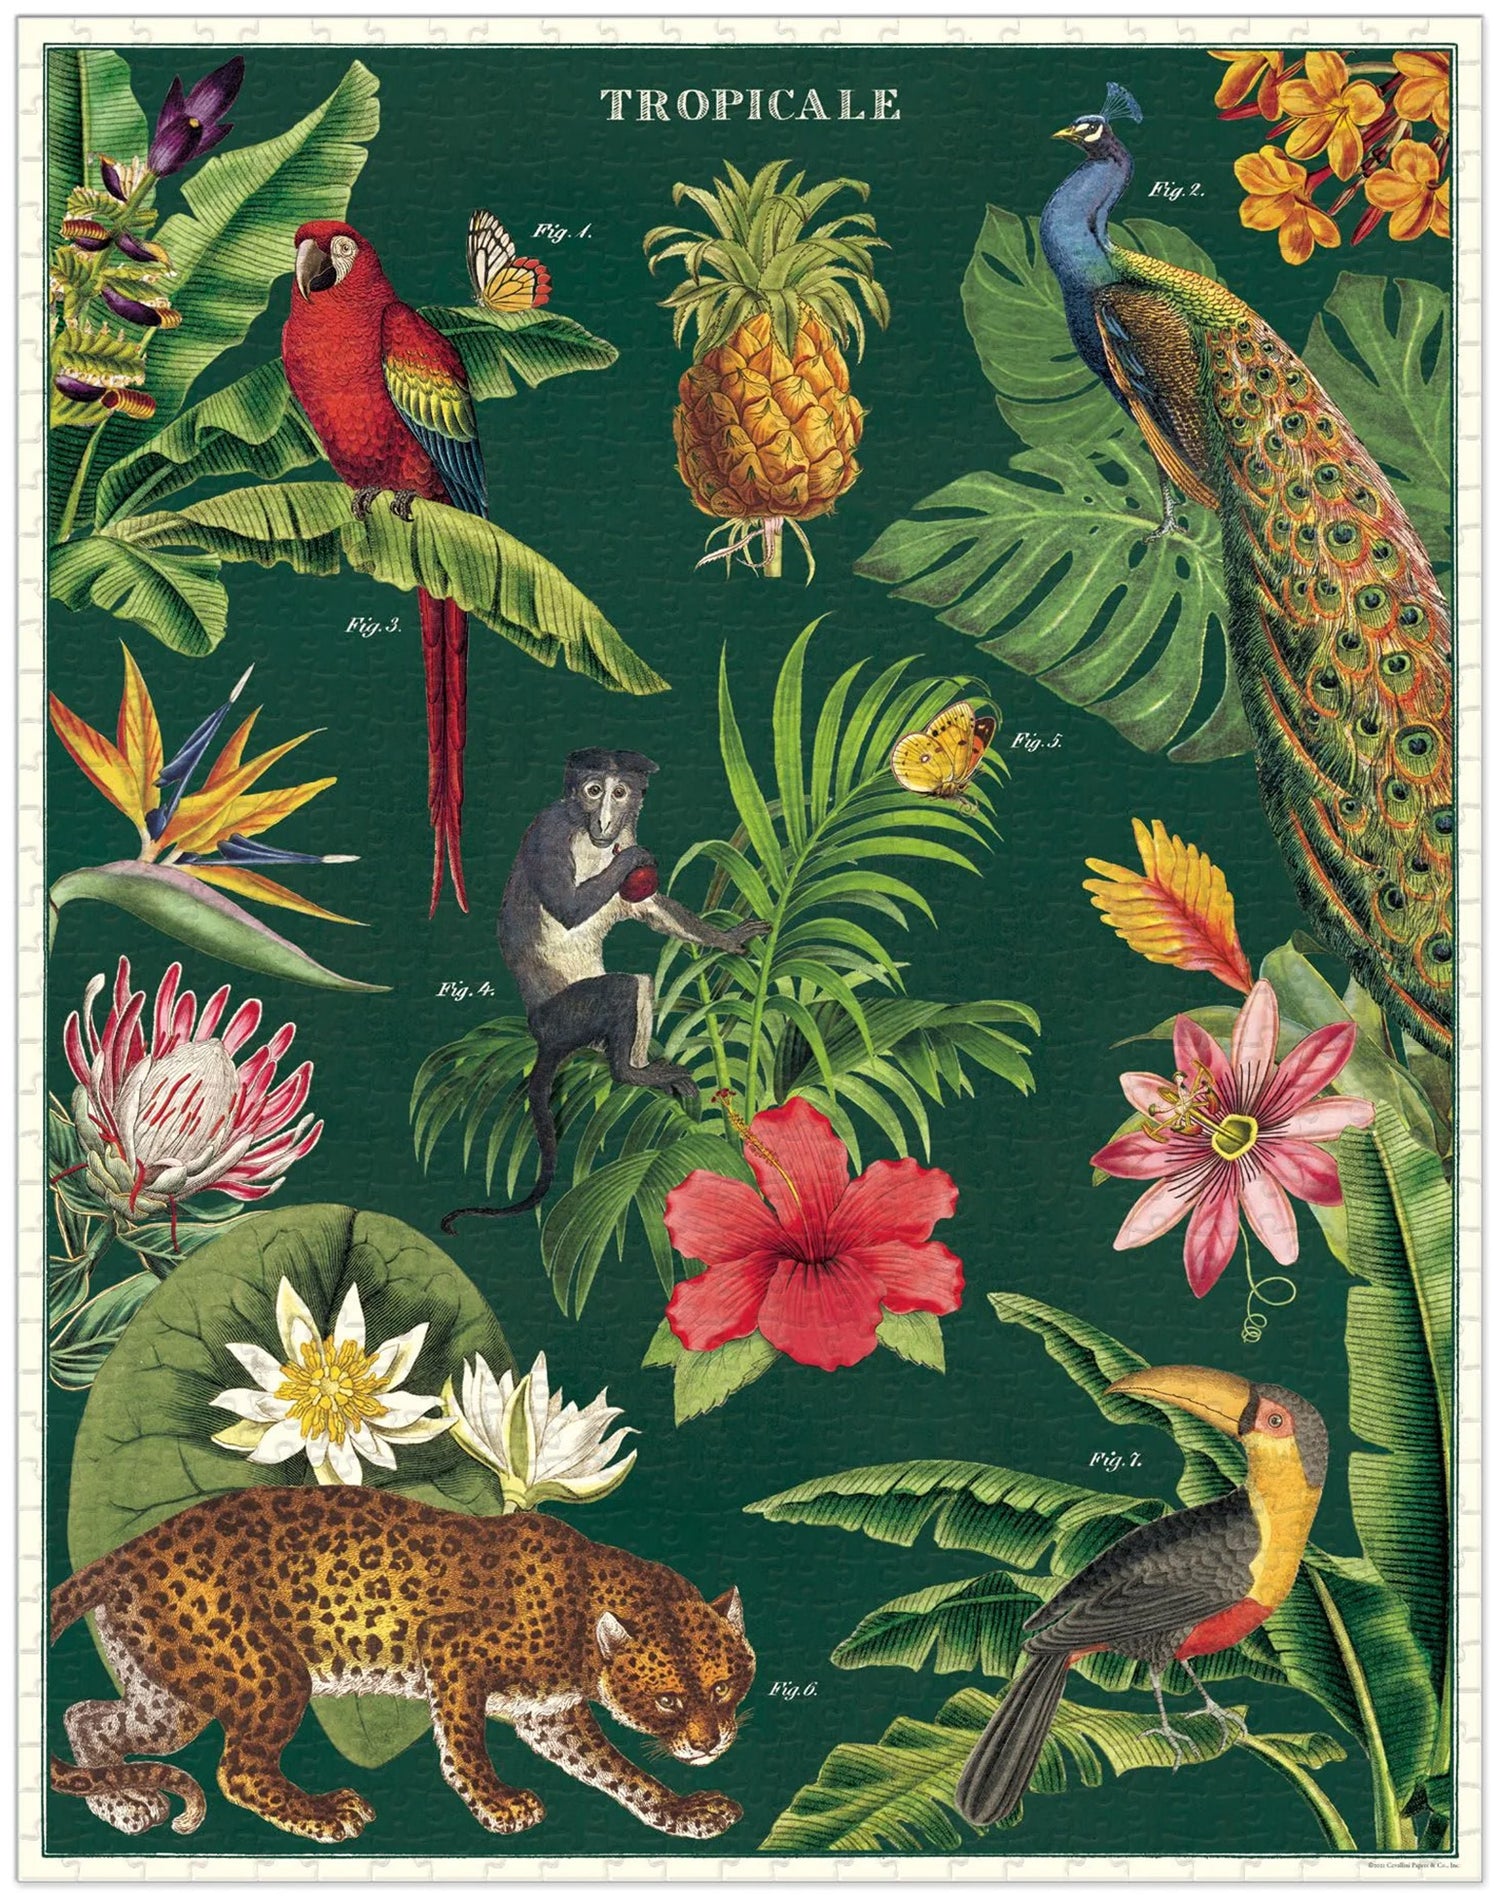 The ready puzzle and the poster show a striking collection of tropic's flora & fauna, including a leopard stalking under the leaves of green.